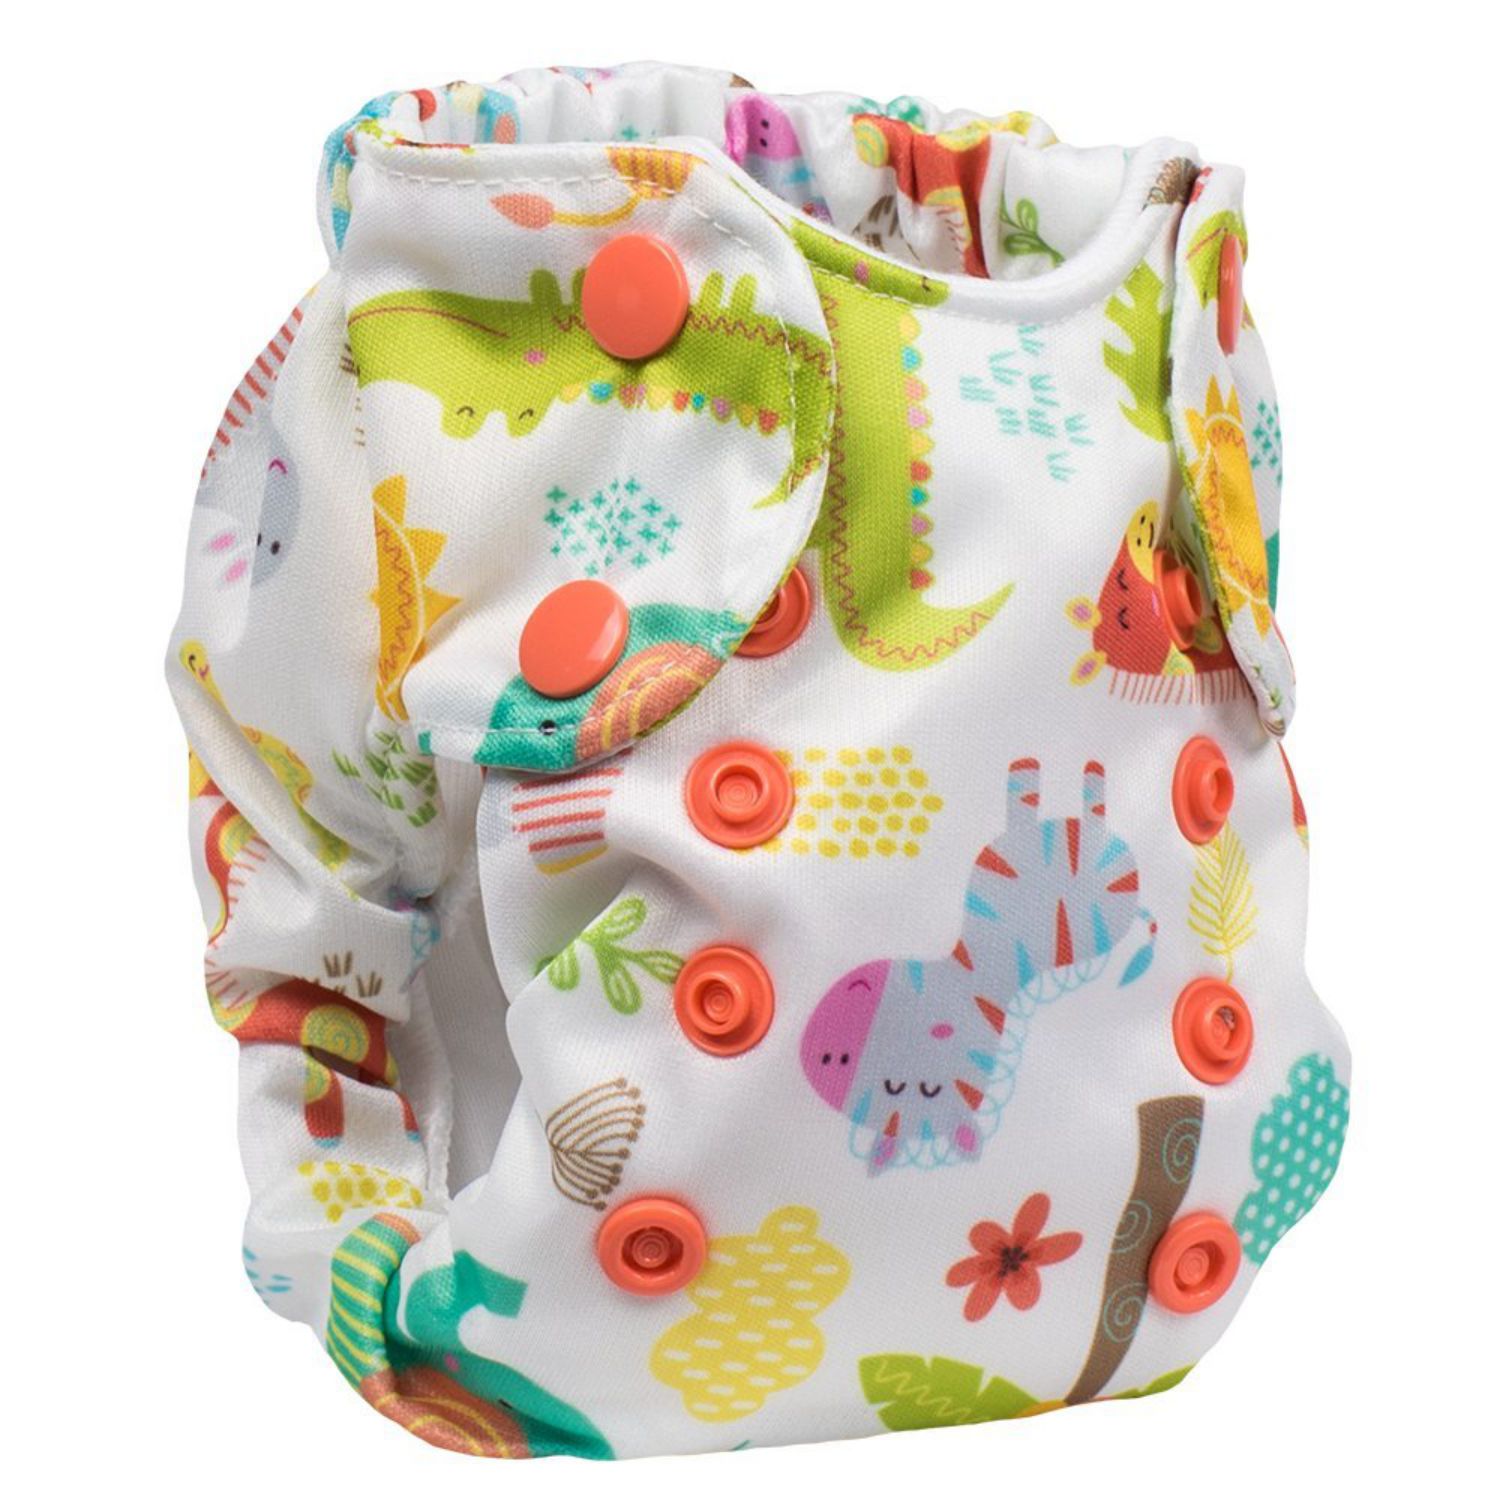 Smart Bottoms Born Smart 2.0 AIO for Newborns Pattern: Wild About you